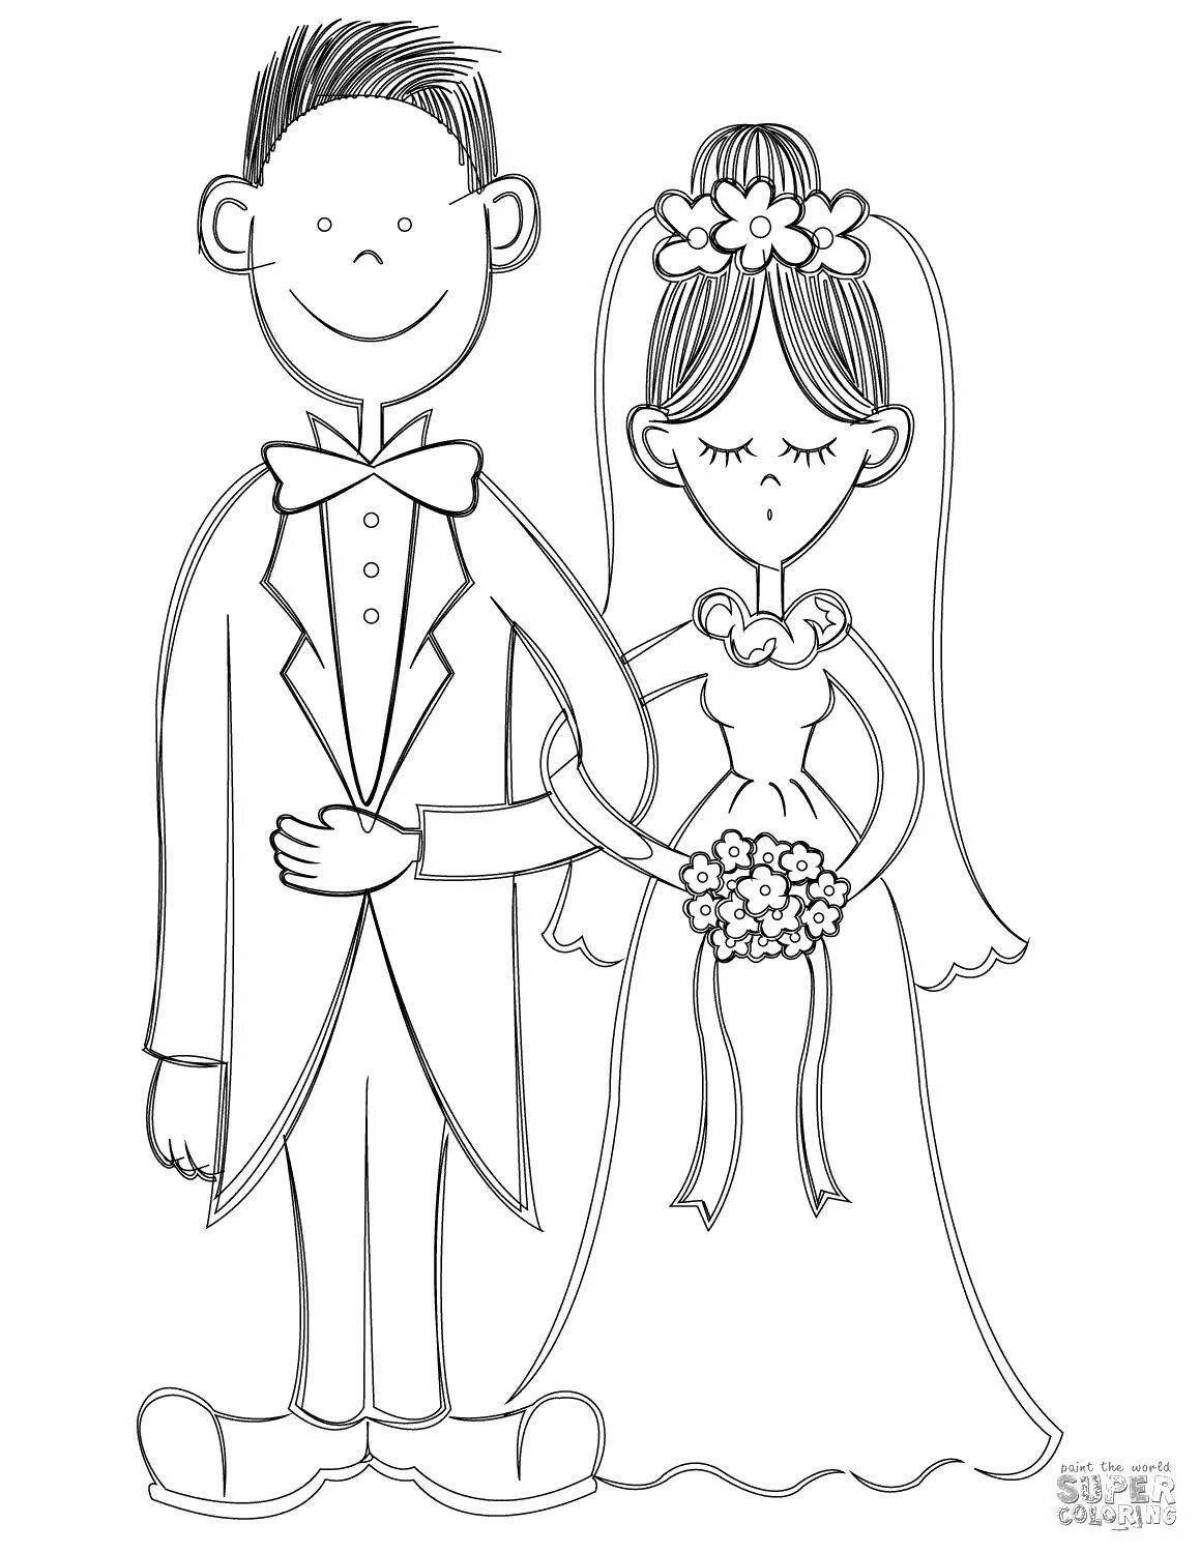 Funny coloring of the bride and groom